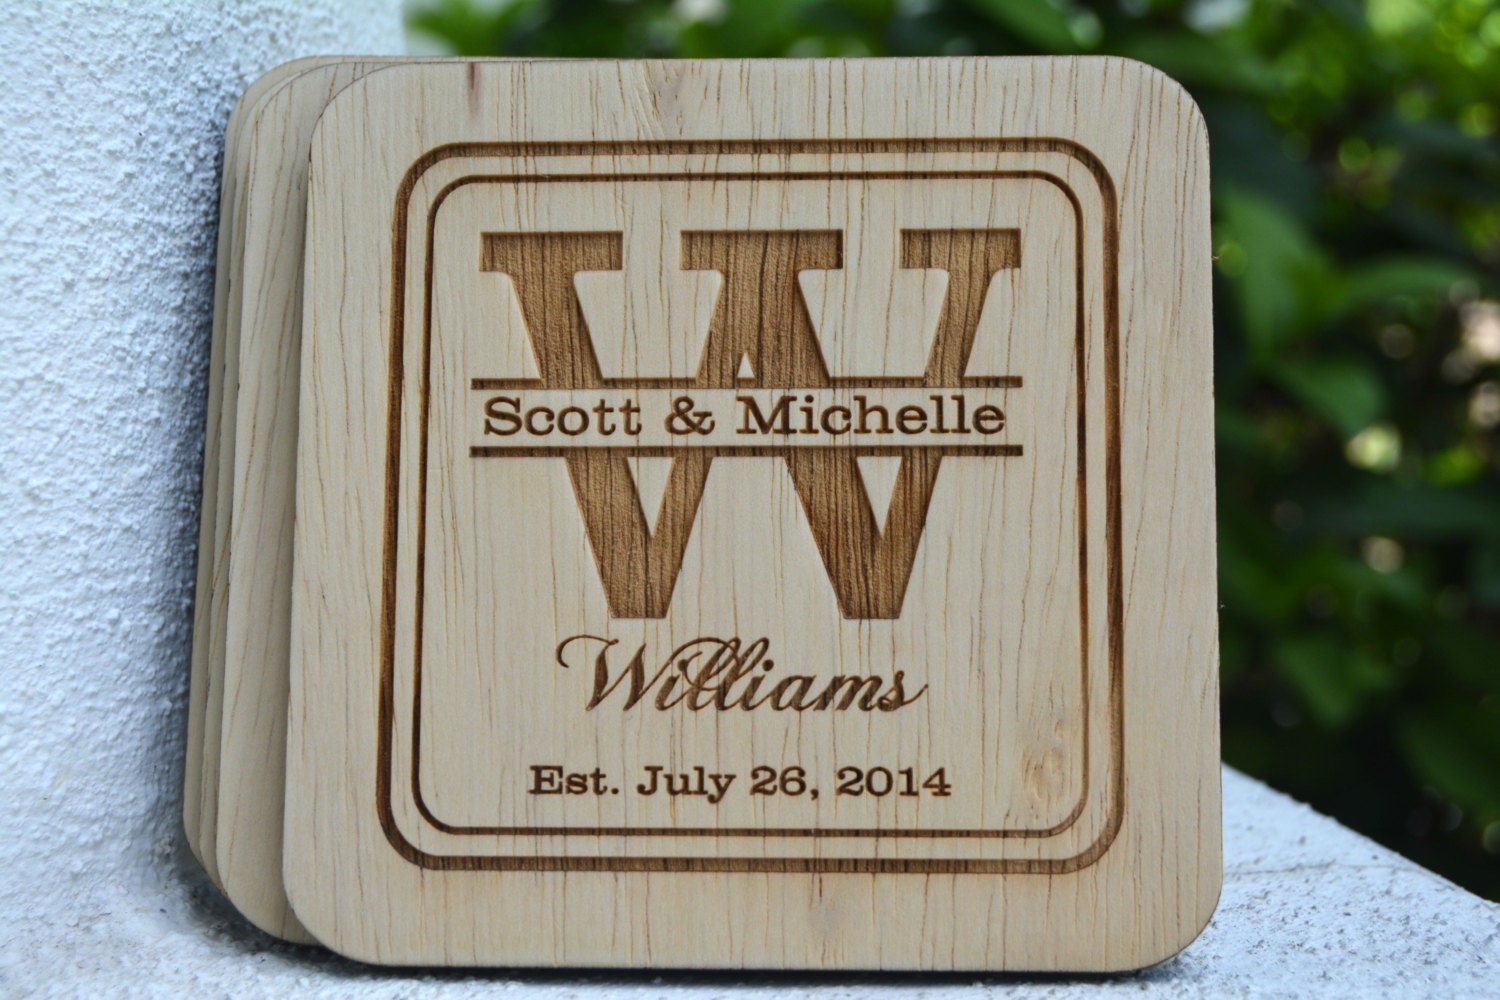 Personalized Wood Coaster - Groovy Groomsmen Gifts